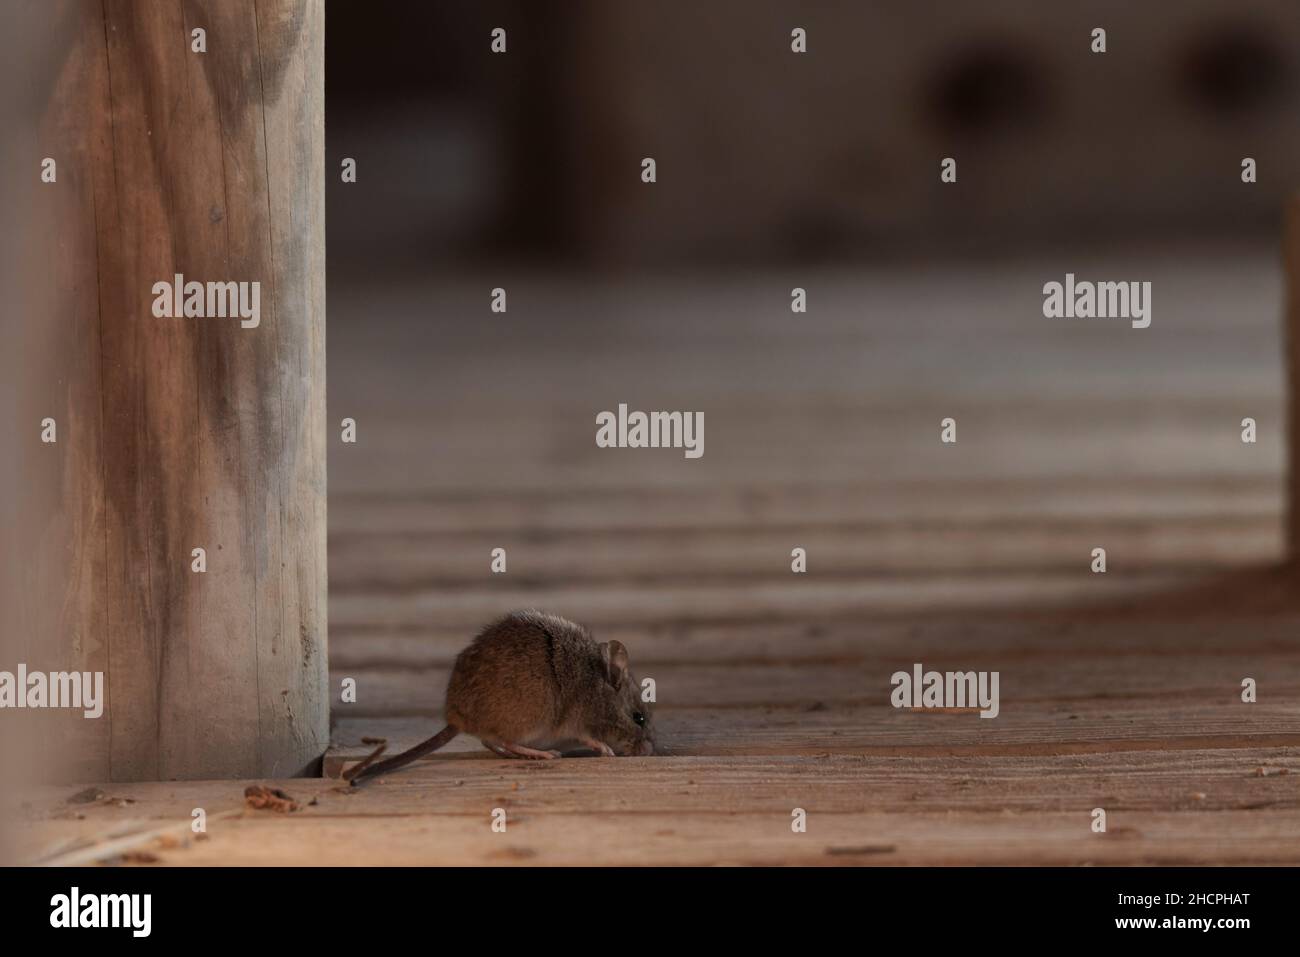 Common mouse Mus musculus on wooden planks Stock Photo